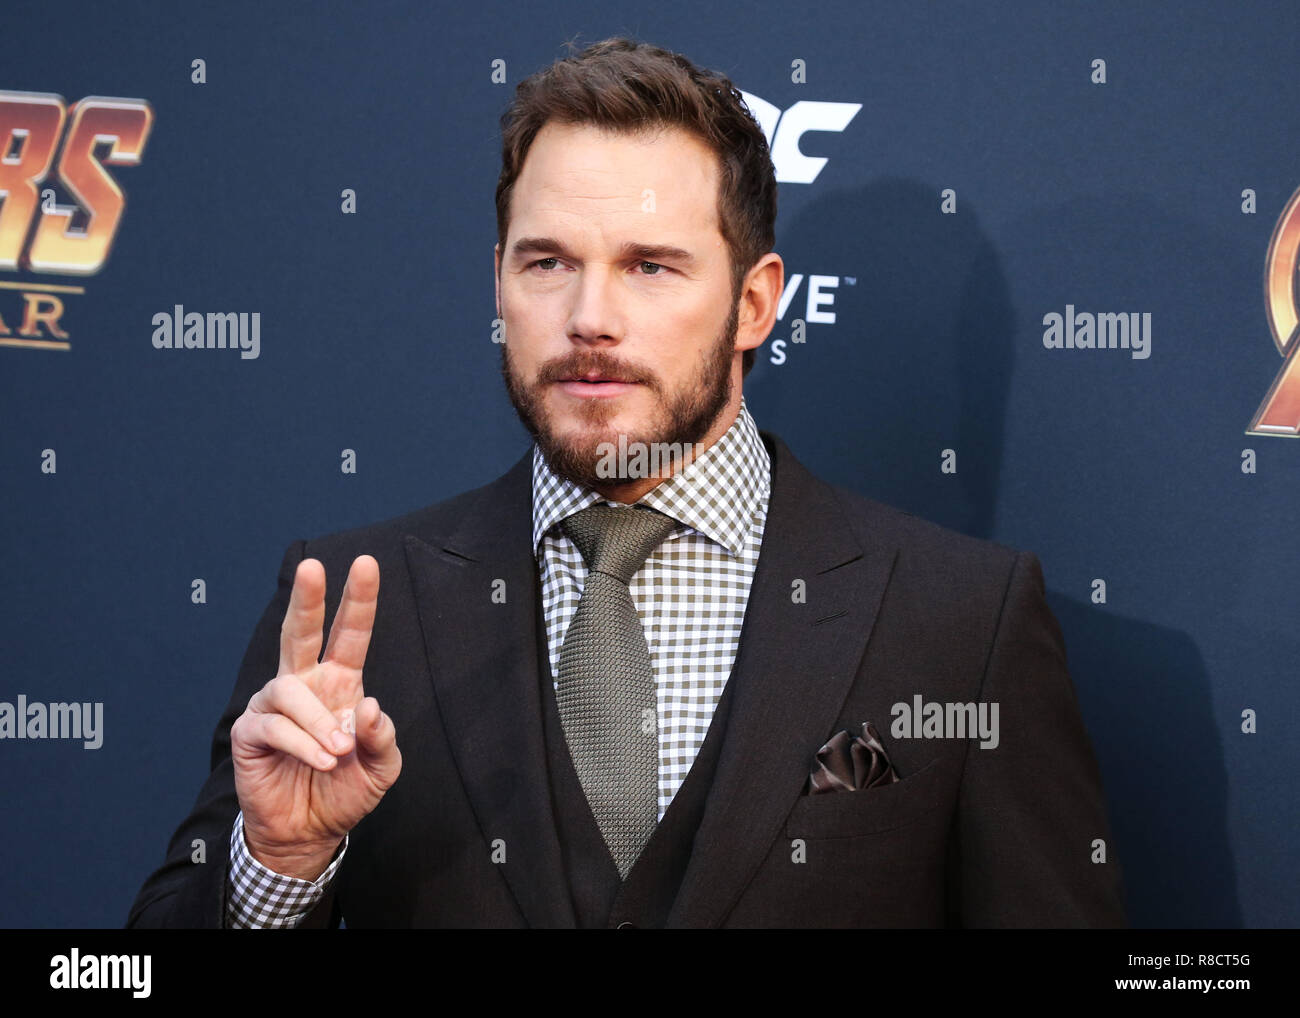 HOLLYWOOD, LOS ANGELES, CA, USA - APRIL 23: Chris Pratt at the World Premiere Of Disney And Marvel's 'Avengers: Infinity War' held at the El Capitan Theatre, Dolby Theatre and TCL Chinese Theatre IMAX on April 23, 2018 in Hollywood, Los Angeles, California, United States. (Photo by Xavier Collin/Image Press Agency) Stock Photo